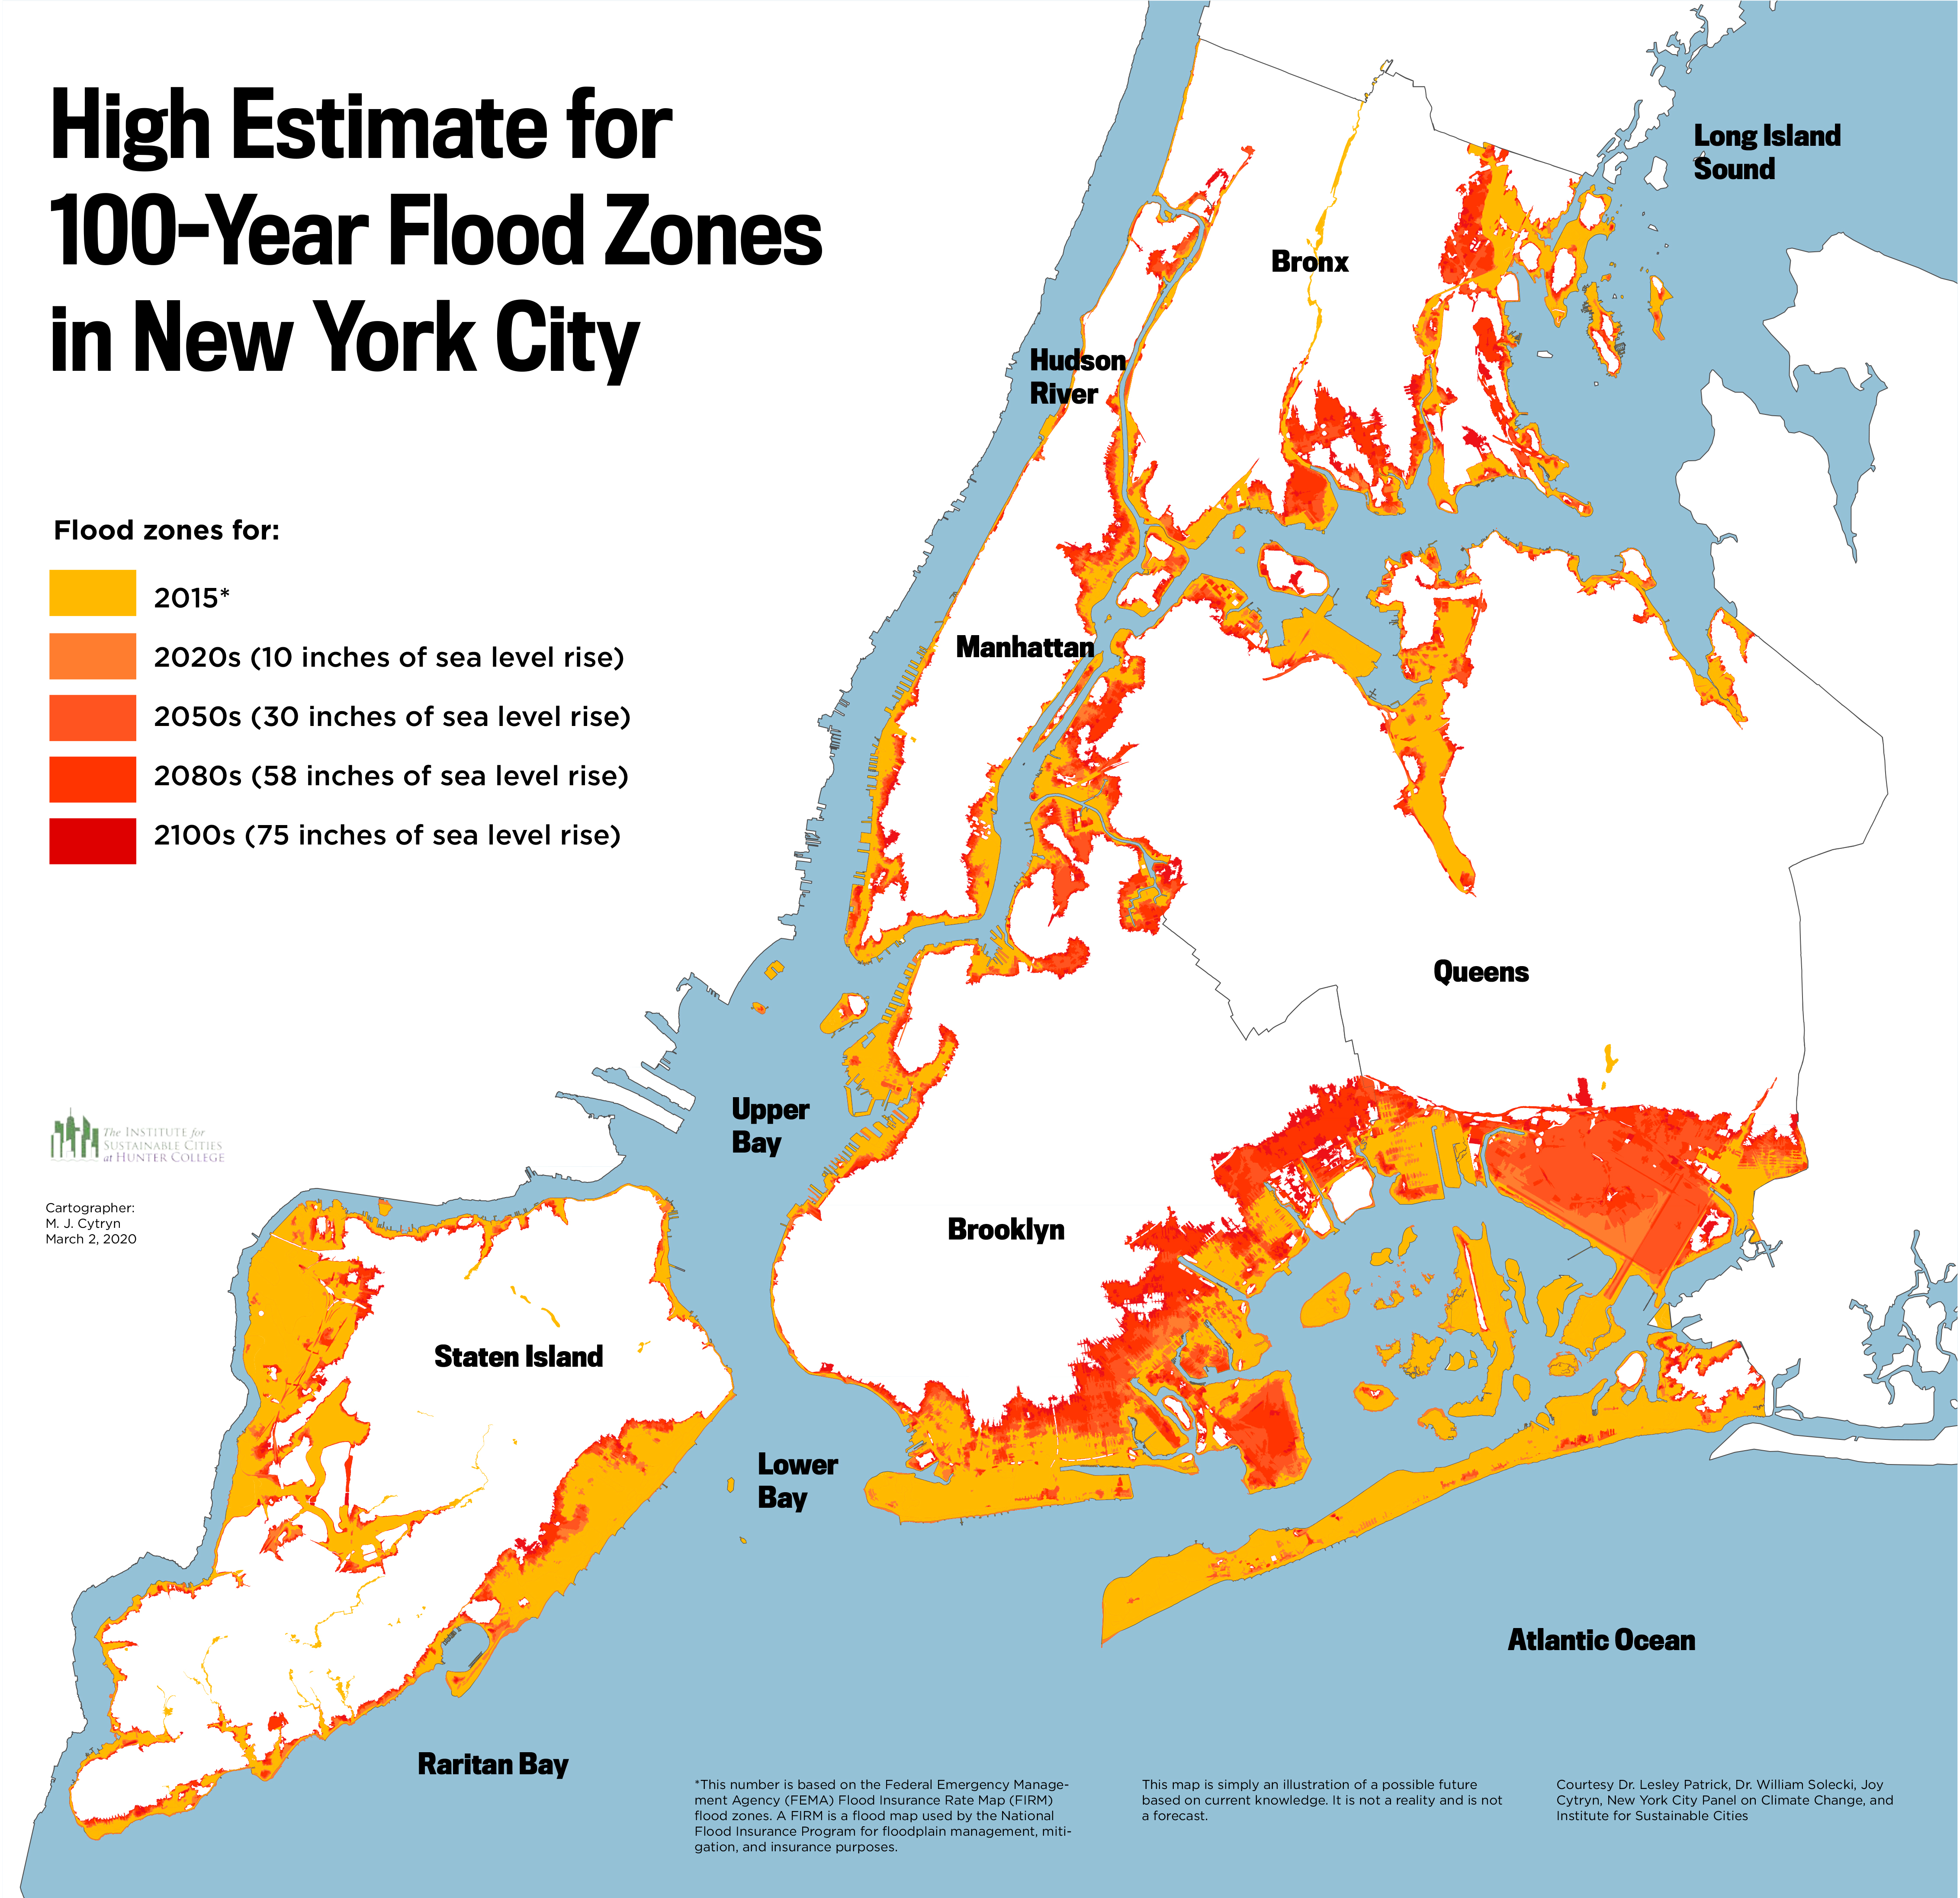 Map showing High Estimate for 100-Year Flood Zones in New York City